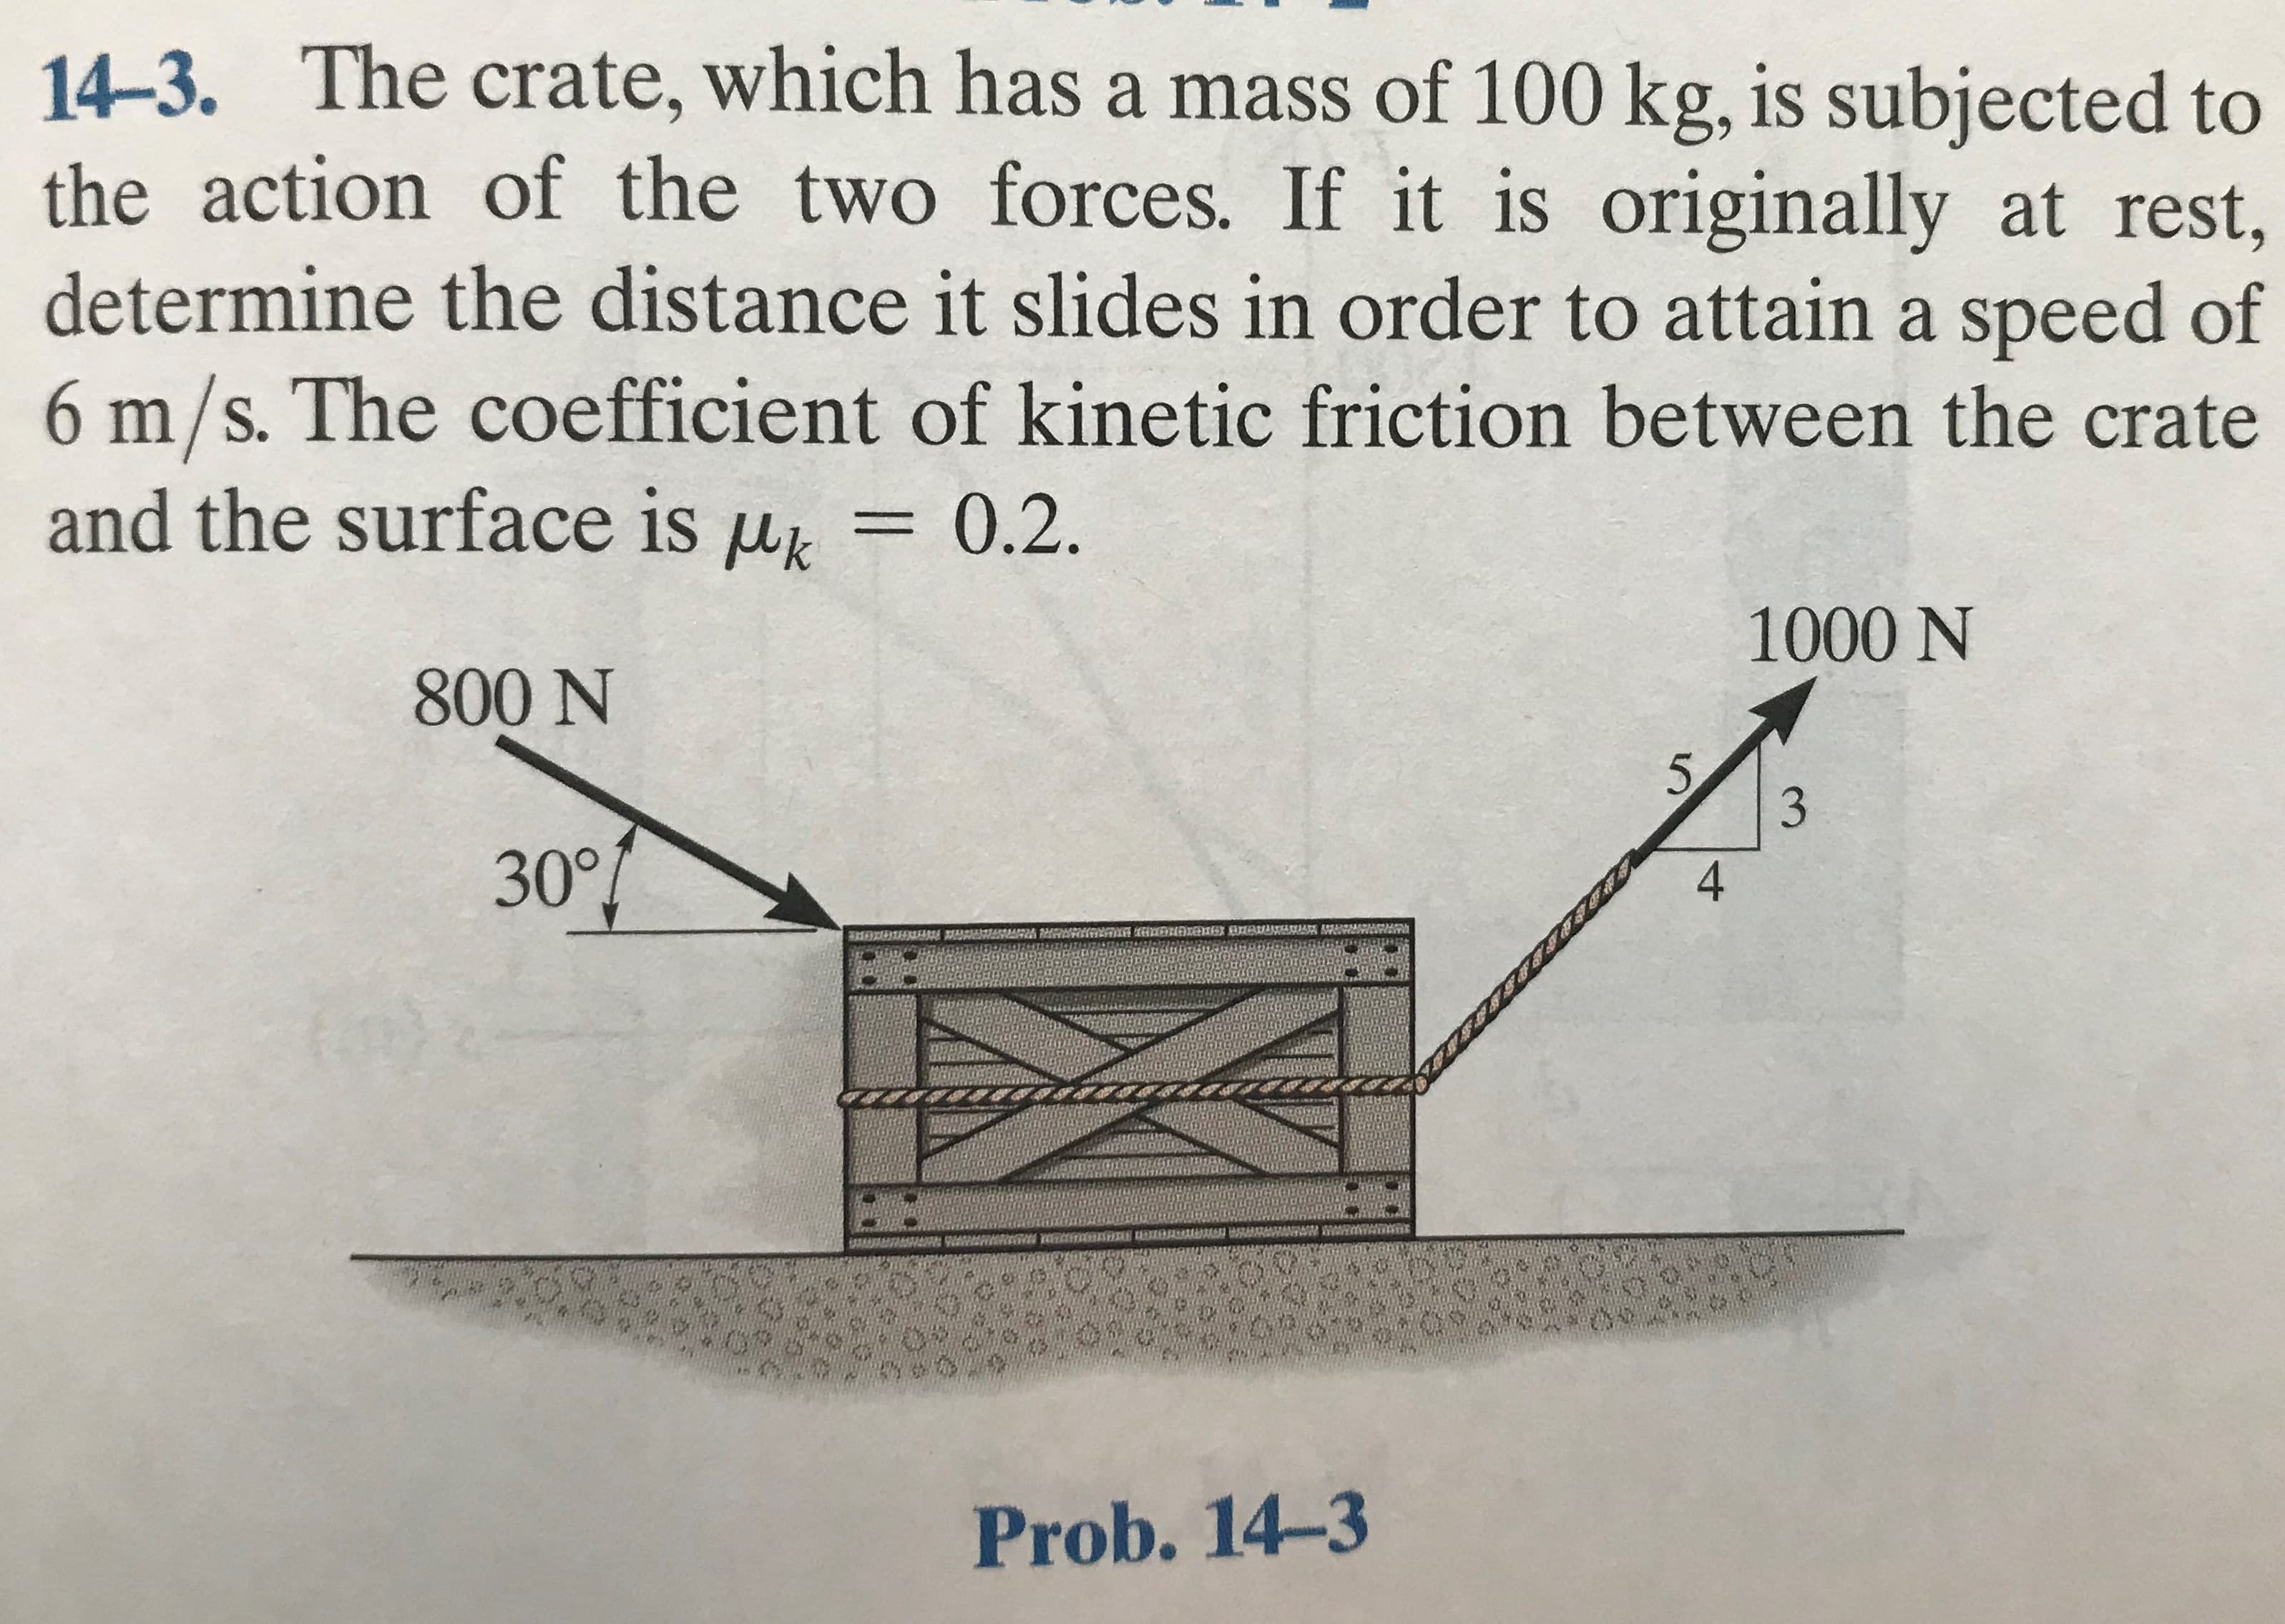 14-3. The crate, which has a mass of 100 kg, is subjected to
the action of the two forces. If it is originally at rest,
determine the distance it slides in order to attain a speed of
6m/s. The coefficient of kinetic friction between the crate
and the surface is uk
=0.2.
1000 N
800 N
5.
4
30°
Prob. 14-3
